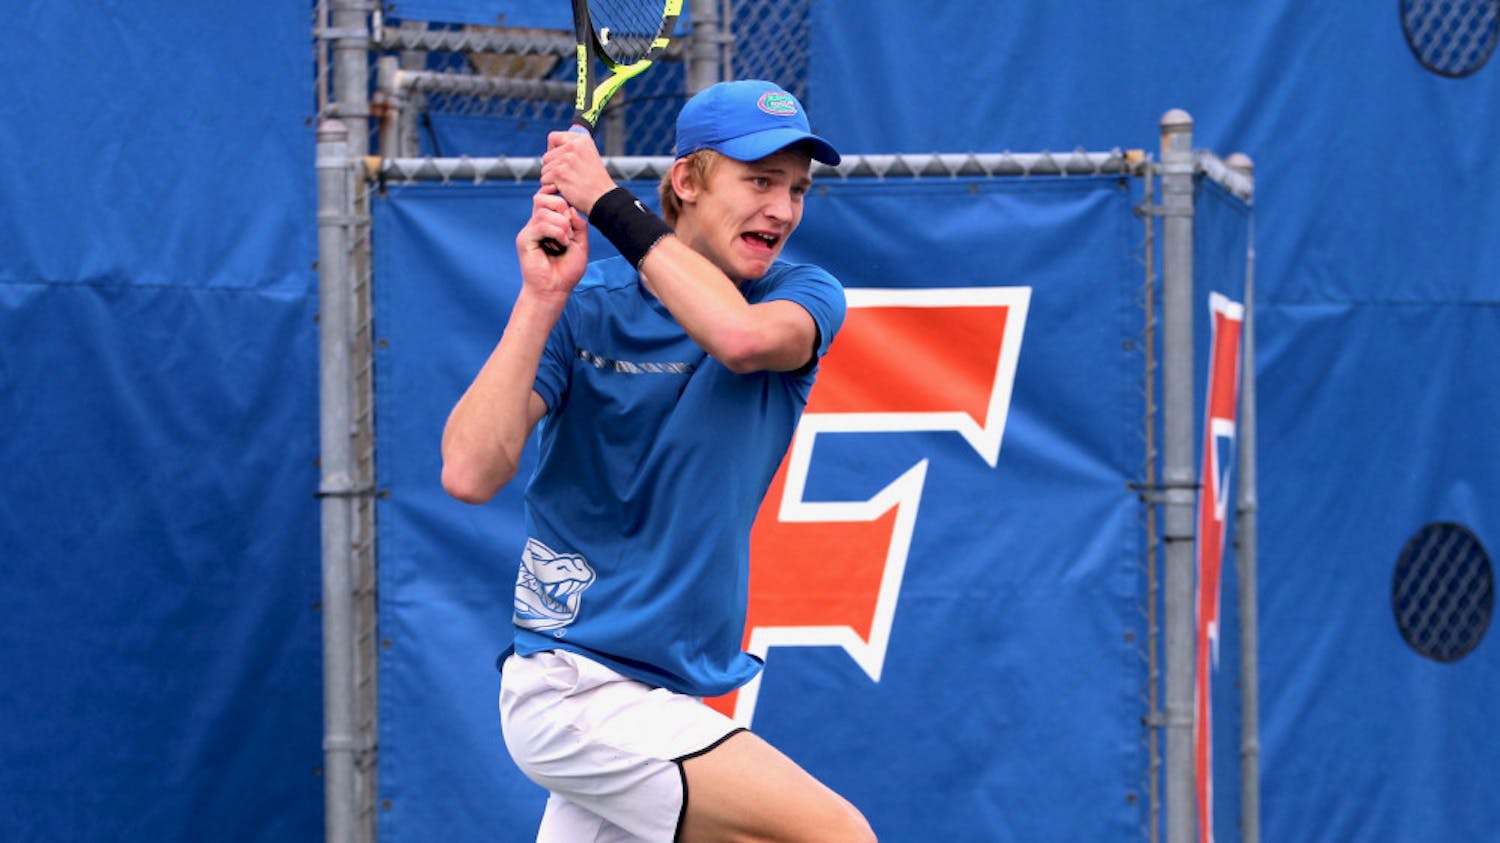 Johannes Ingildsen won the clinching singles match in a 4-3 win for Florida's men's tennis team over Notre Dame on Saturday.